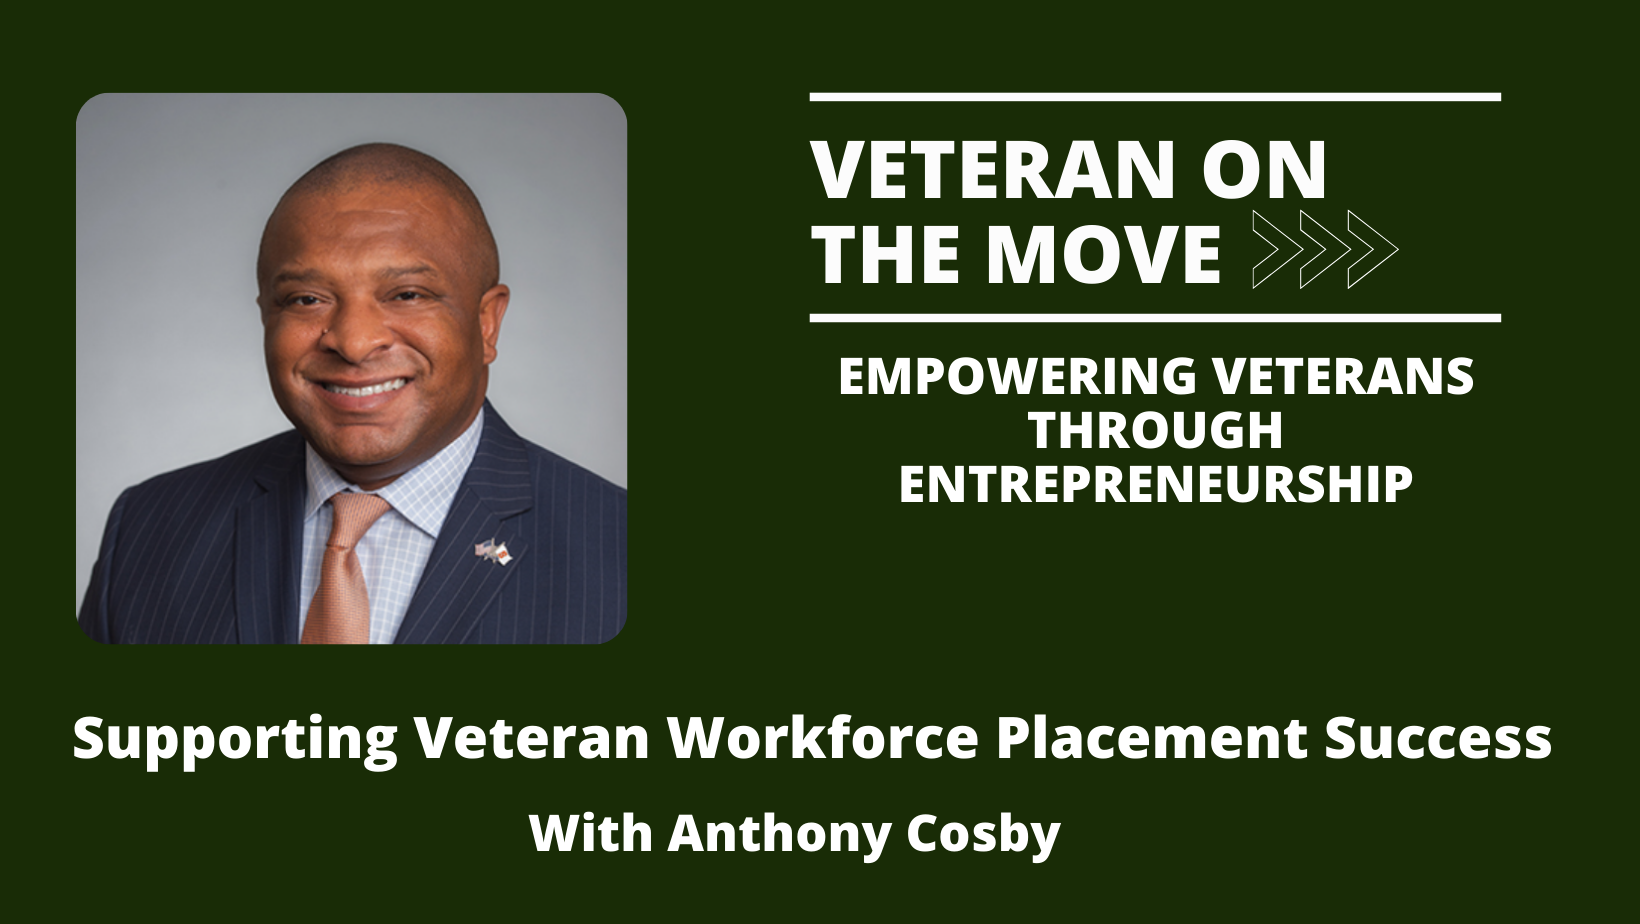 Anthony Cosby, Veteran On The Move